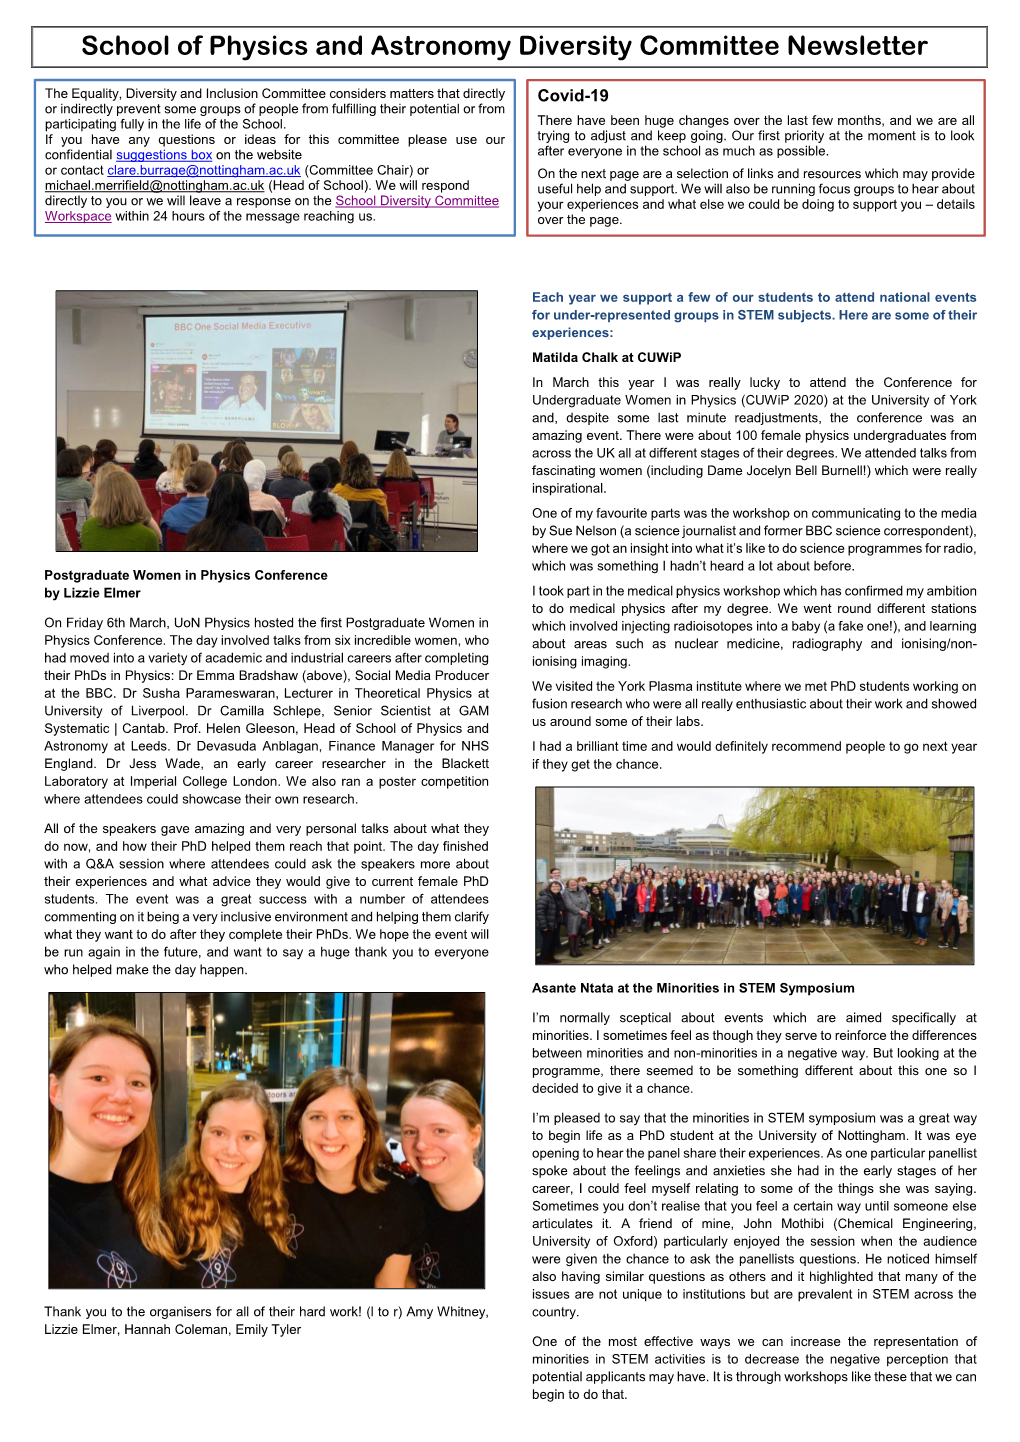 School of Physics and Astronomy Diversity Committee Newsletter